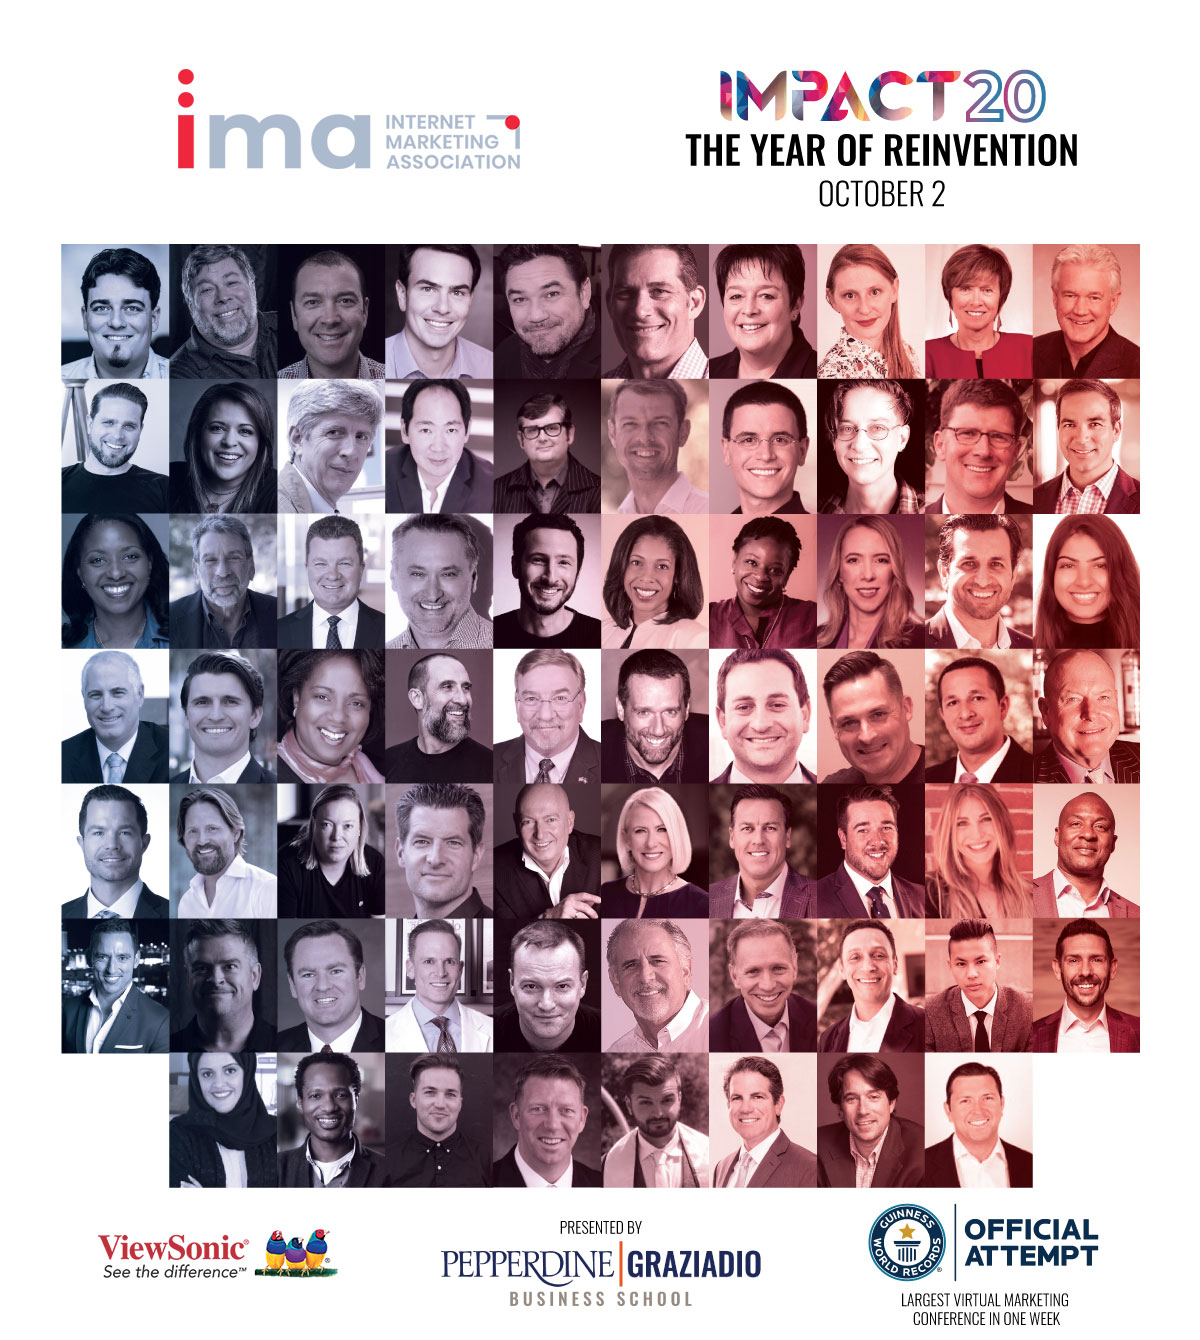 You're Invited to IMPACT 20: The Year of Reinvention